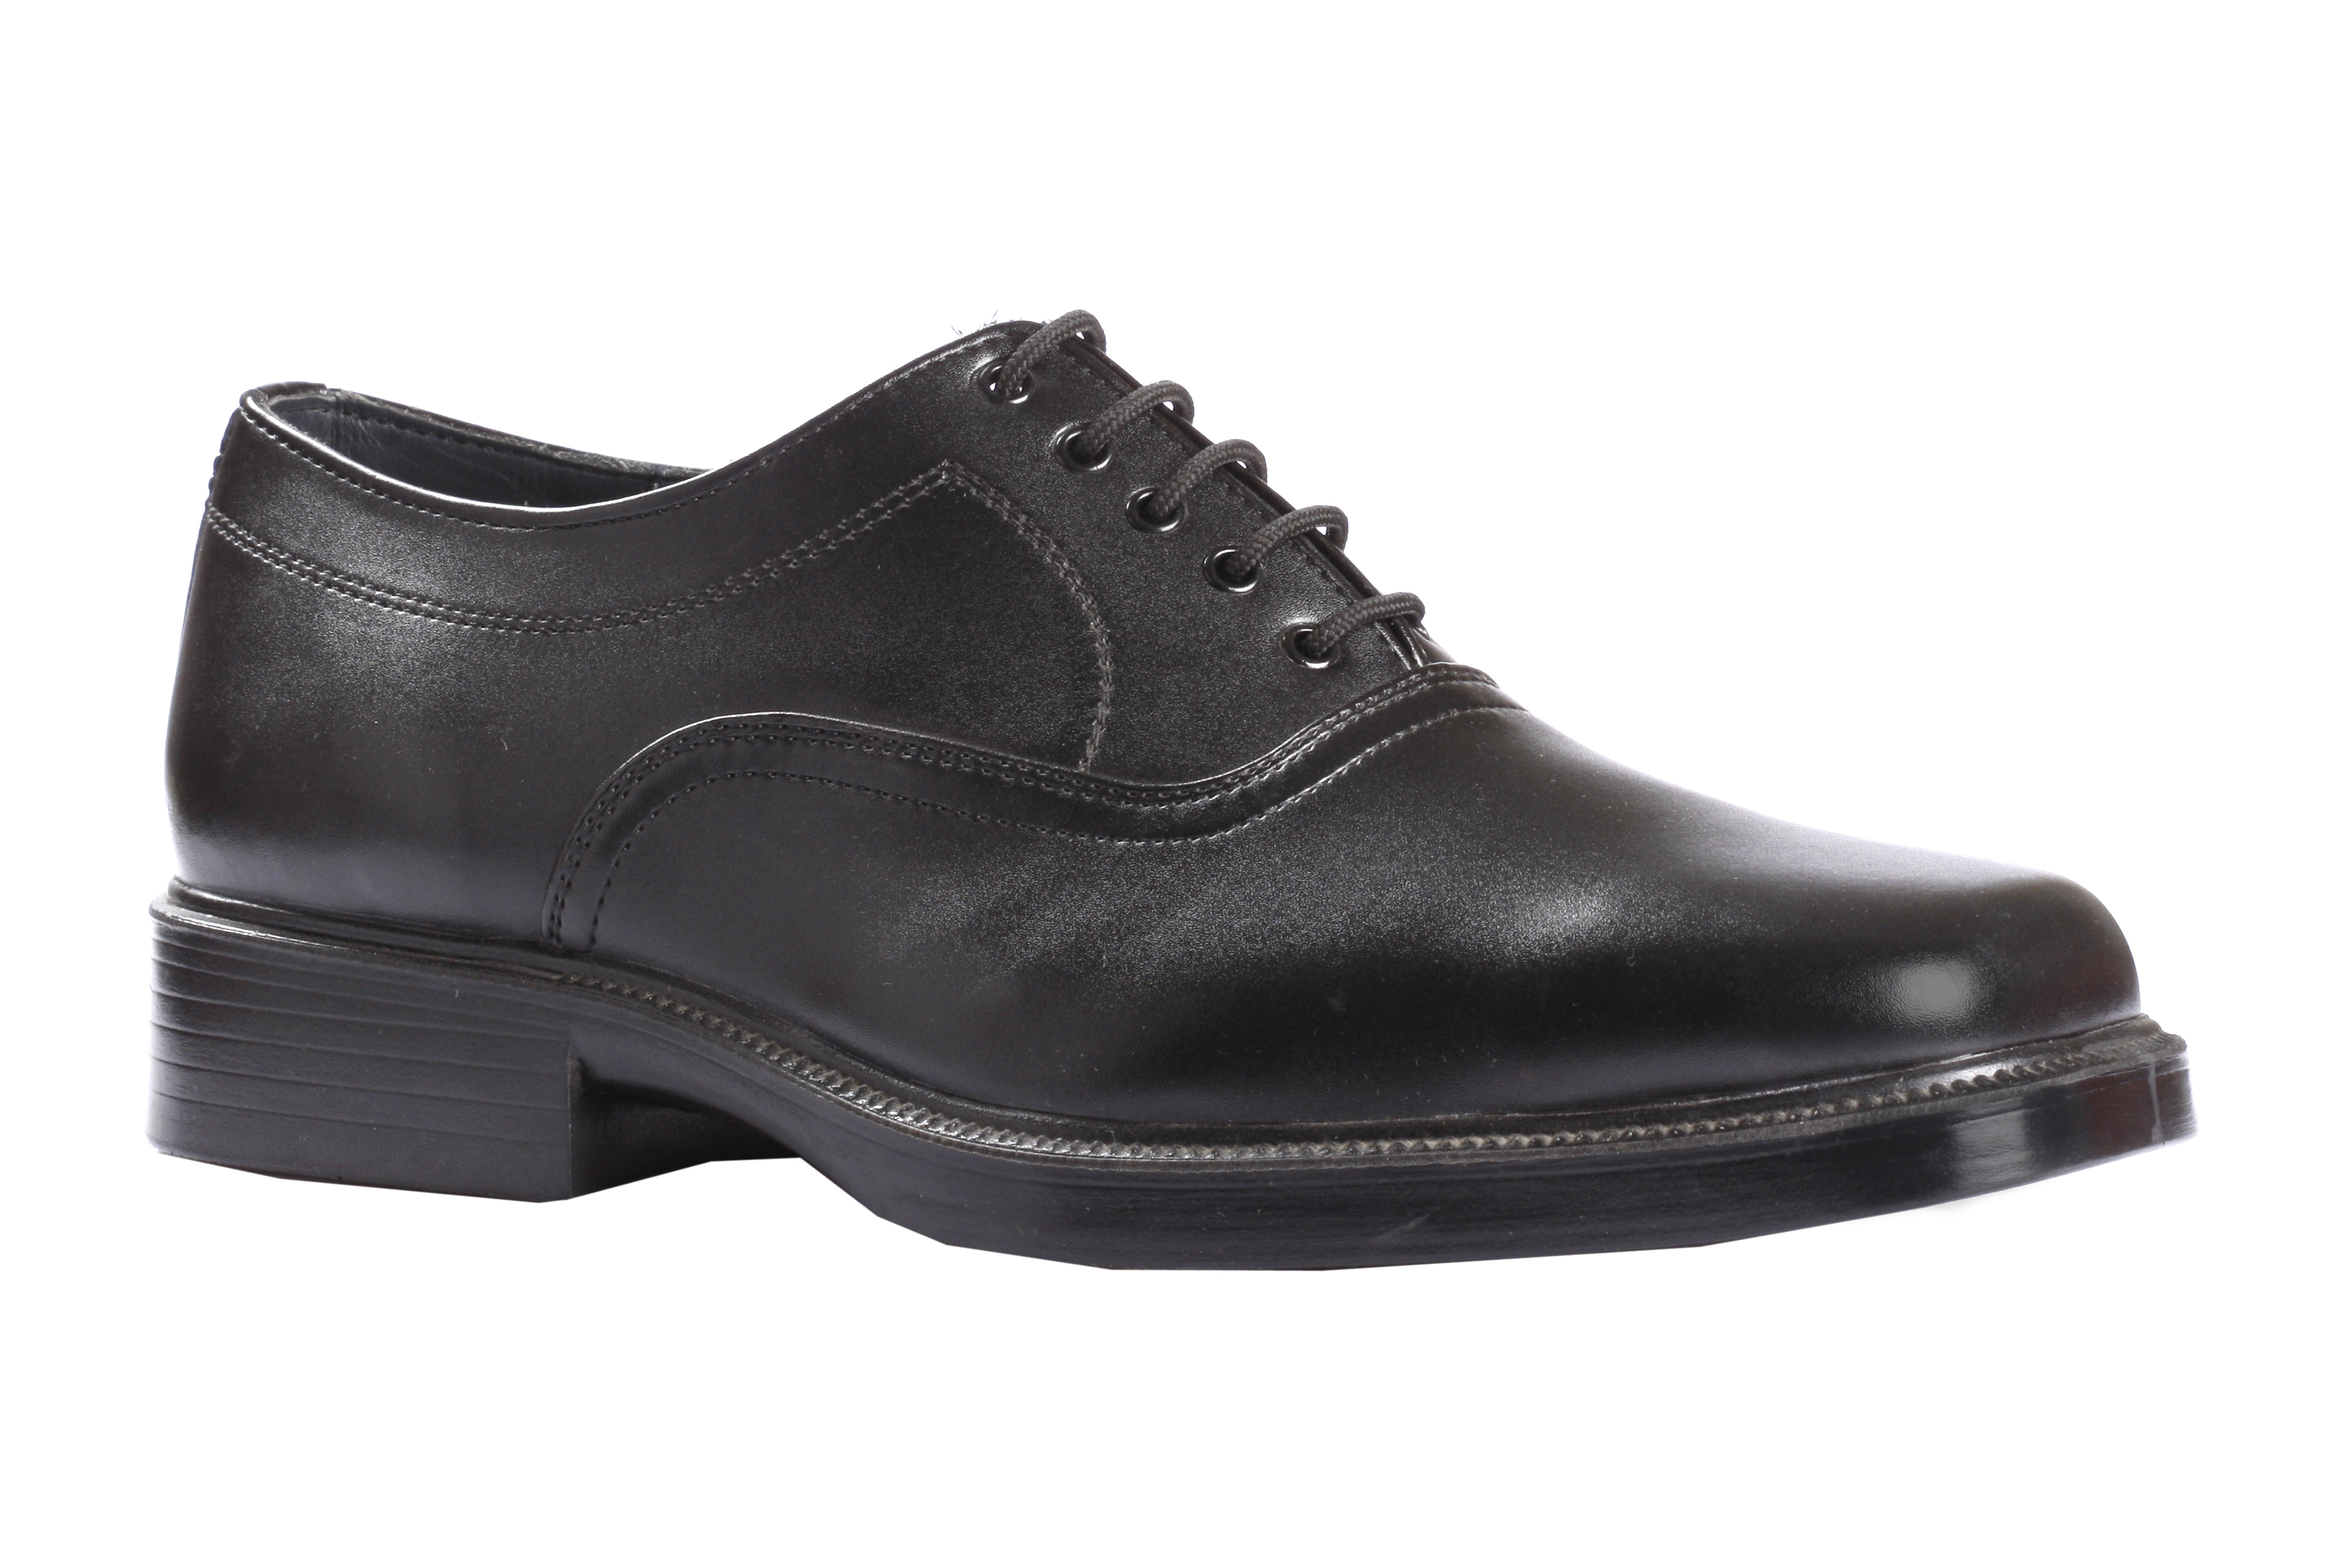 Buy Fortune Men's (Black) Classic Oxford Shoes 7139-02 By Liberty